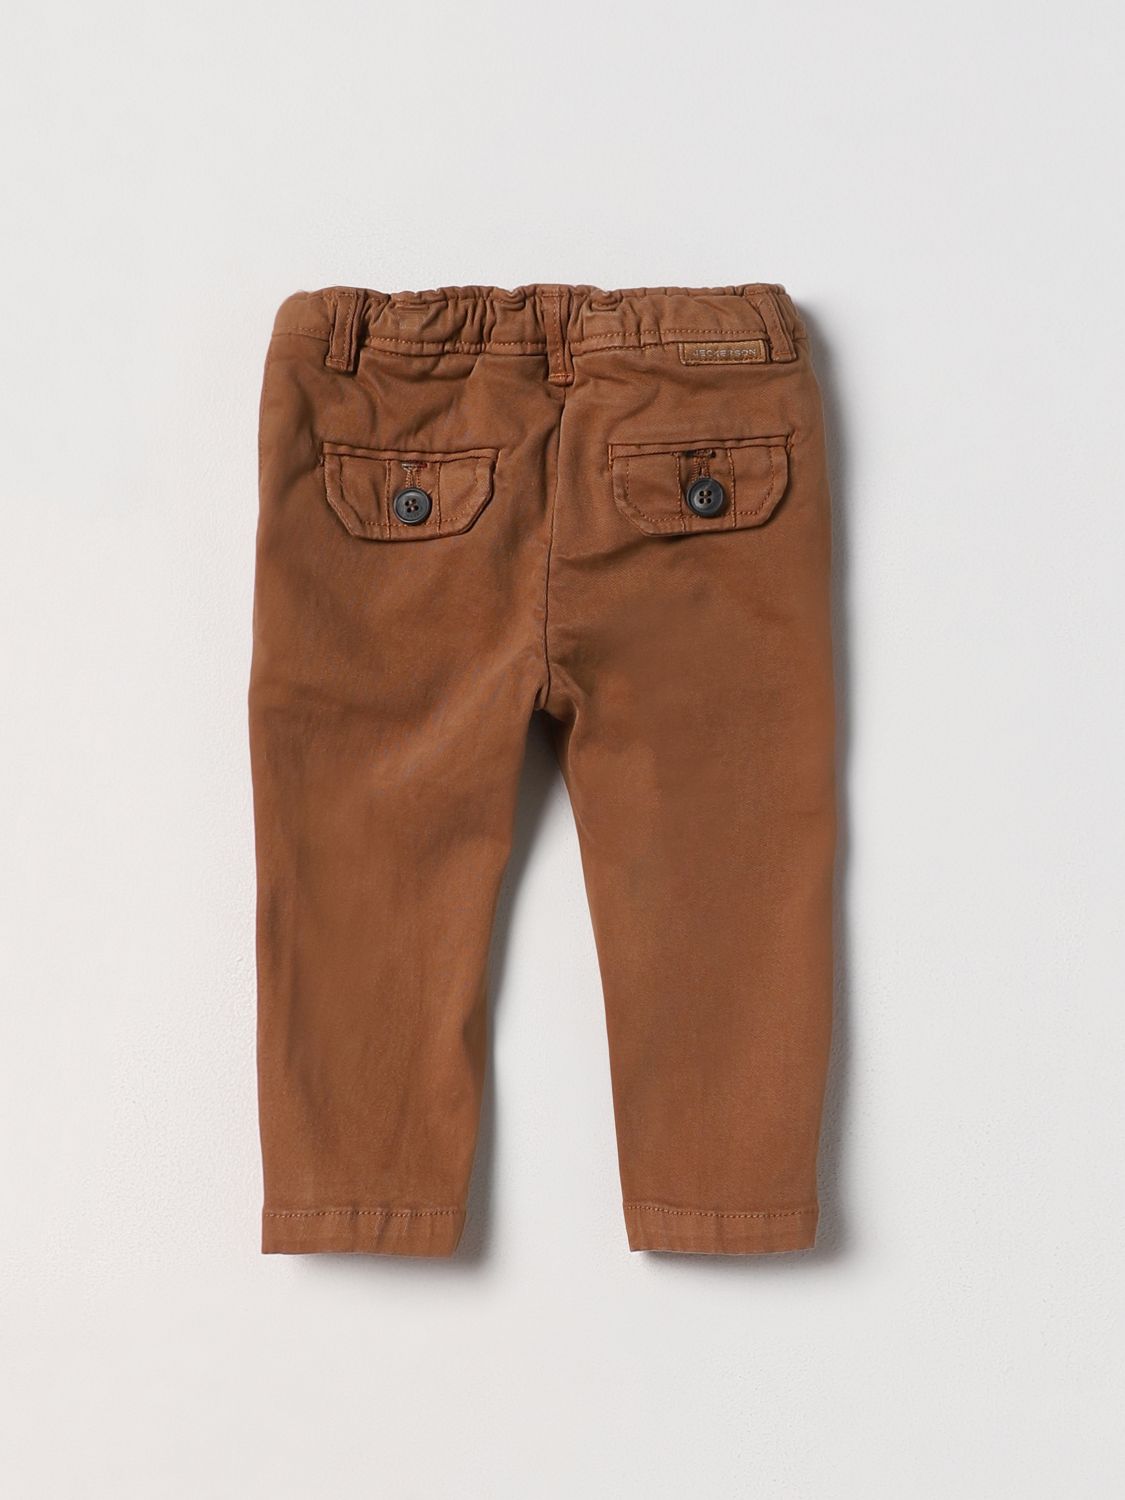 Jeckerson children's trousers with patches Camel